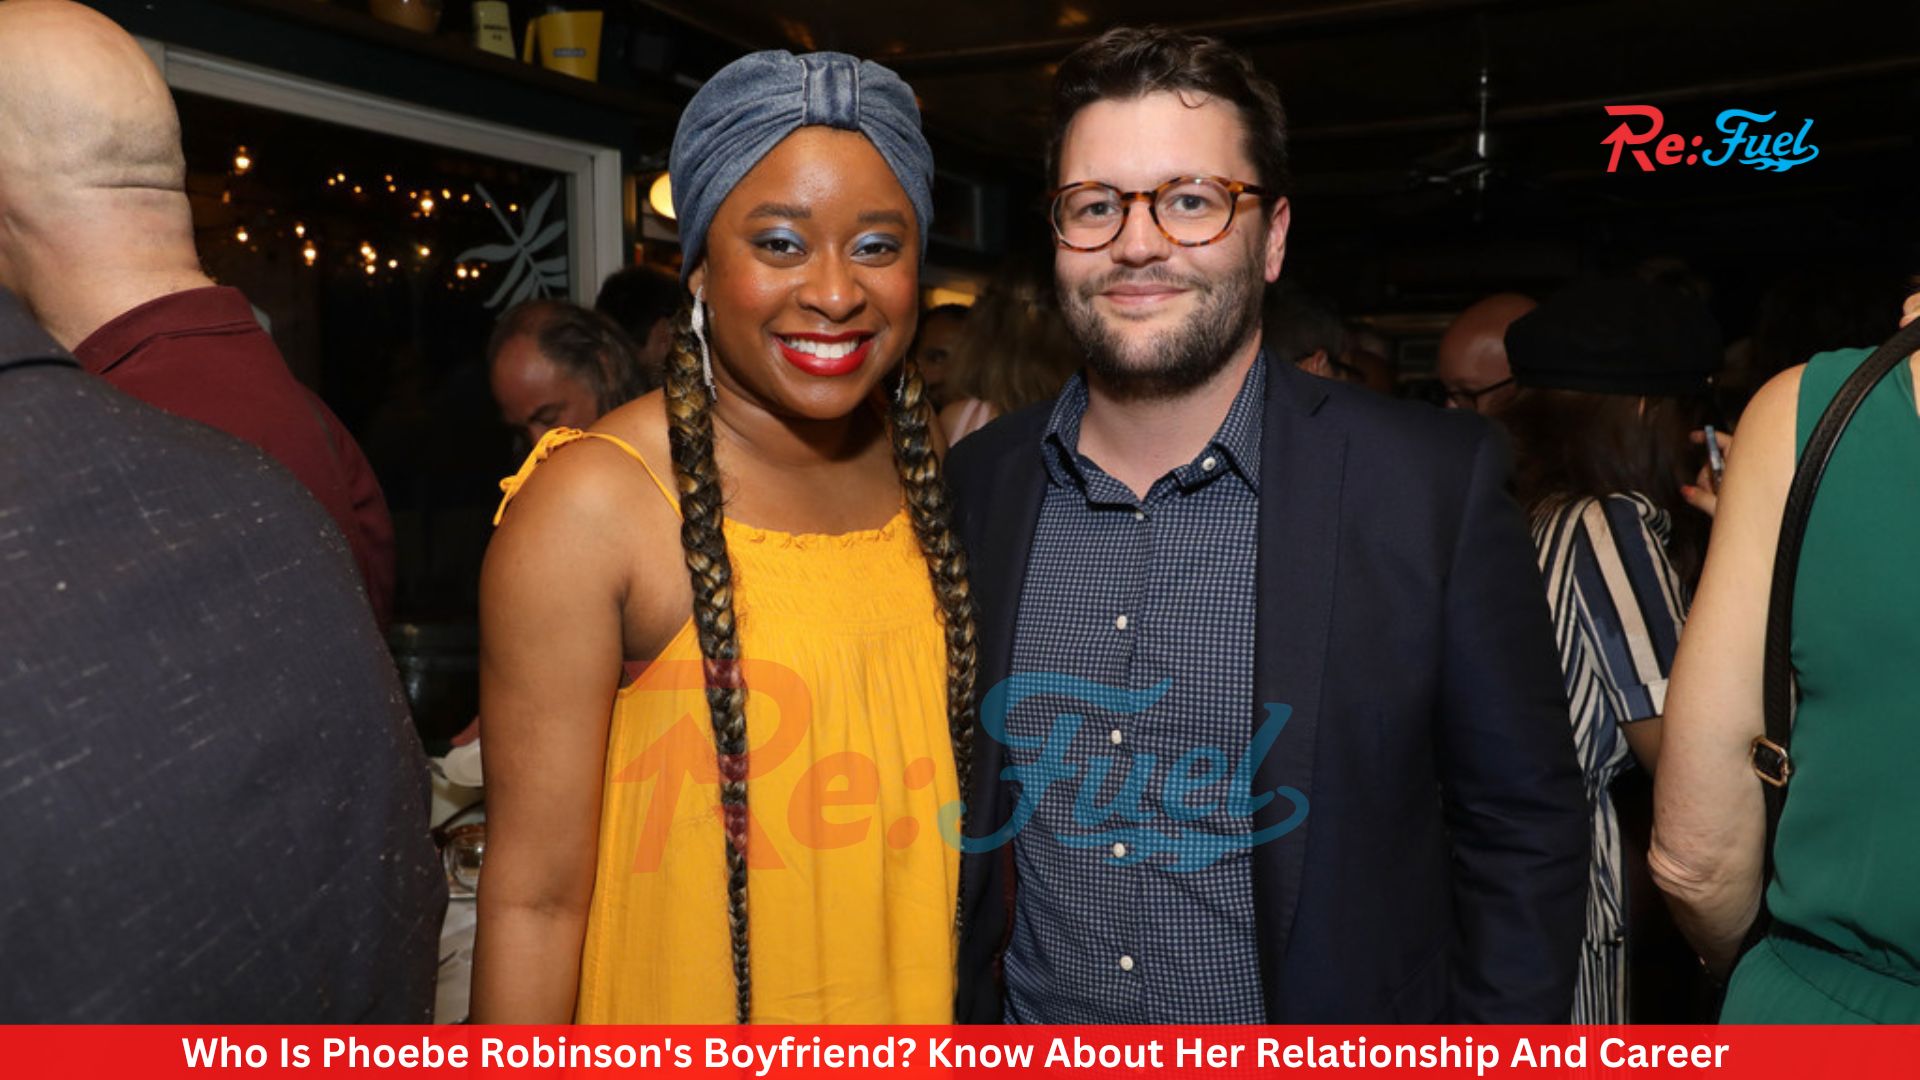 Who Is Phoebe Robinson's Boyfriend? Know About Her Relationship And Career